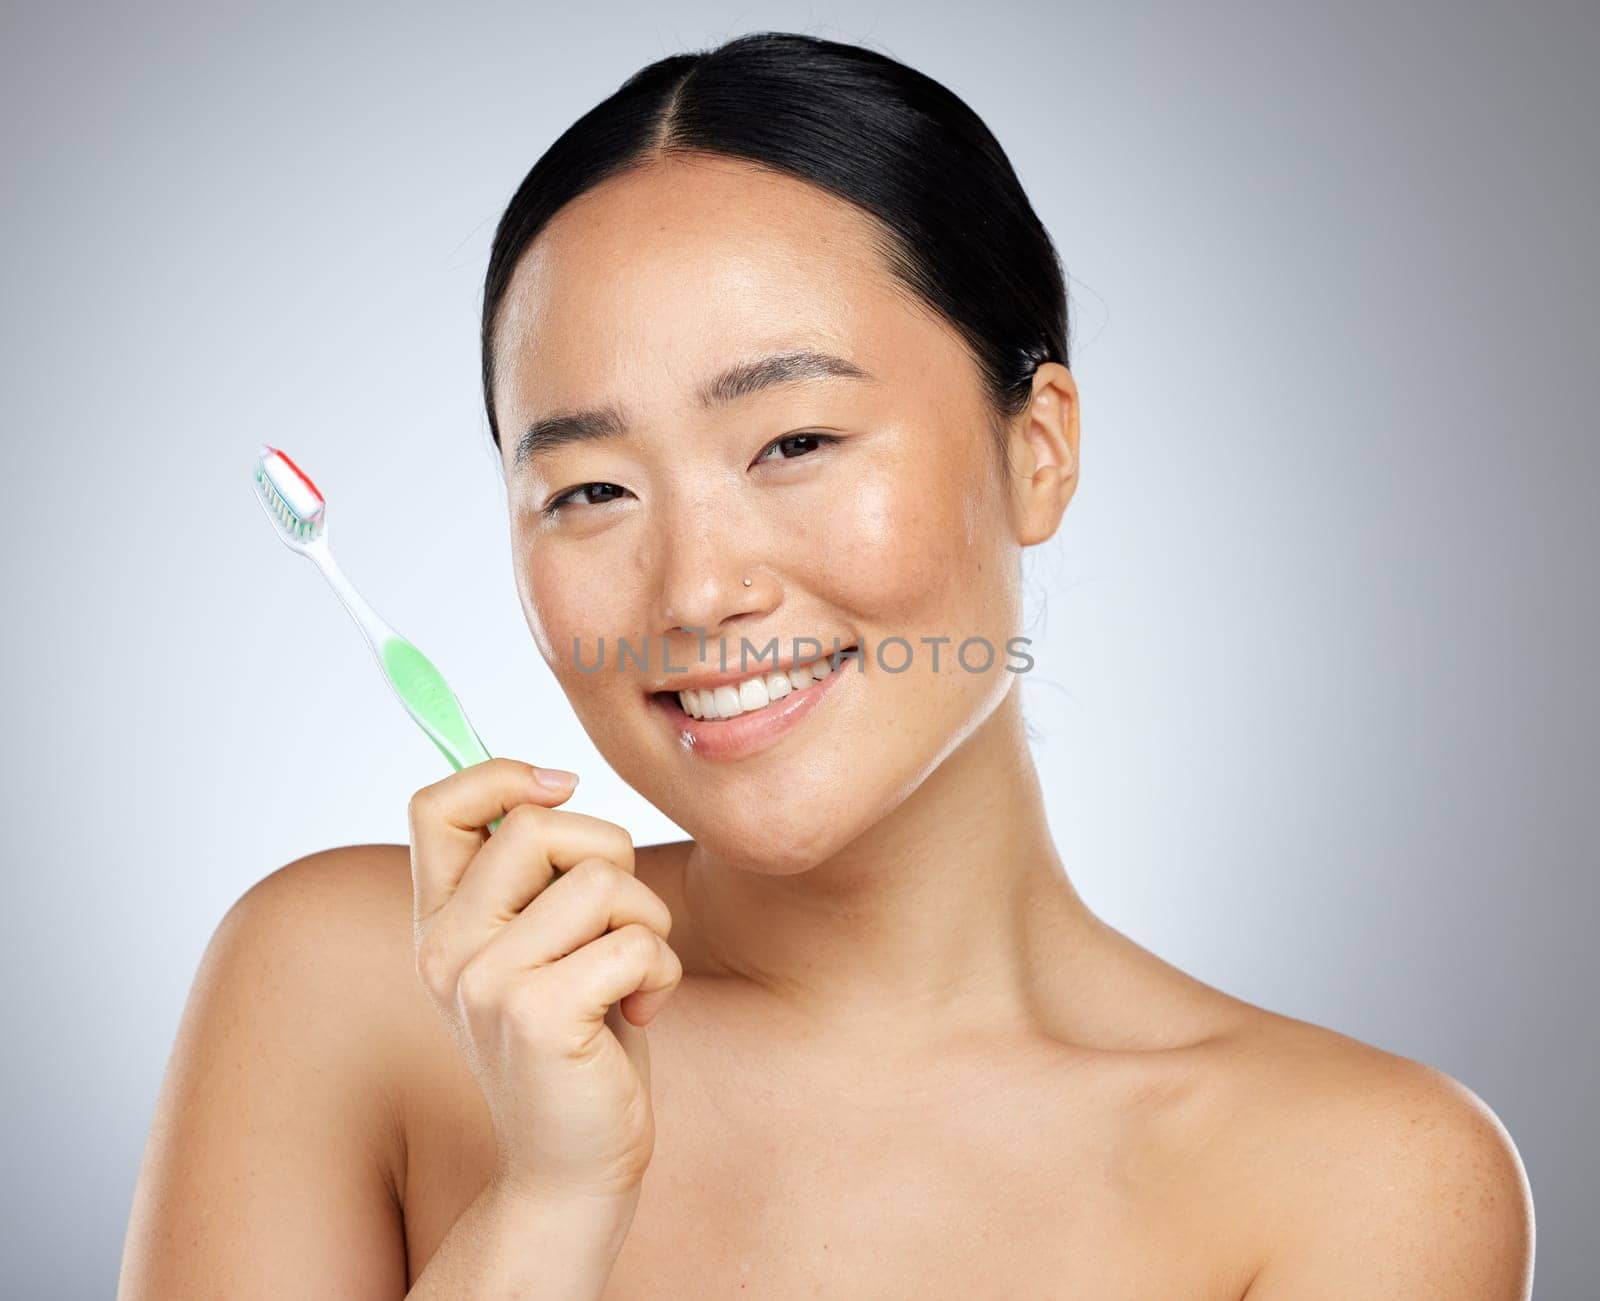 Beauty, dental care and oral hygiene with an asian woman in studio on a gray background with a smile. Portratit, teeth and toothbrush with a young female brushing her teeth for health or wellness.